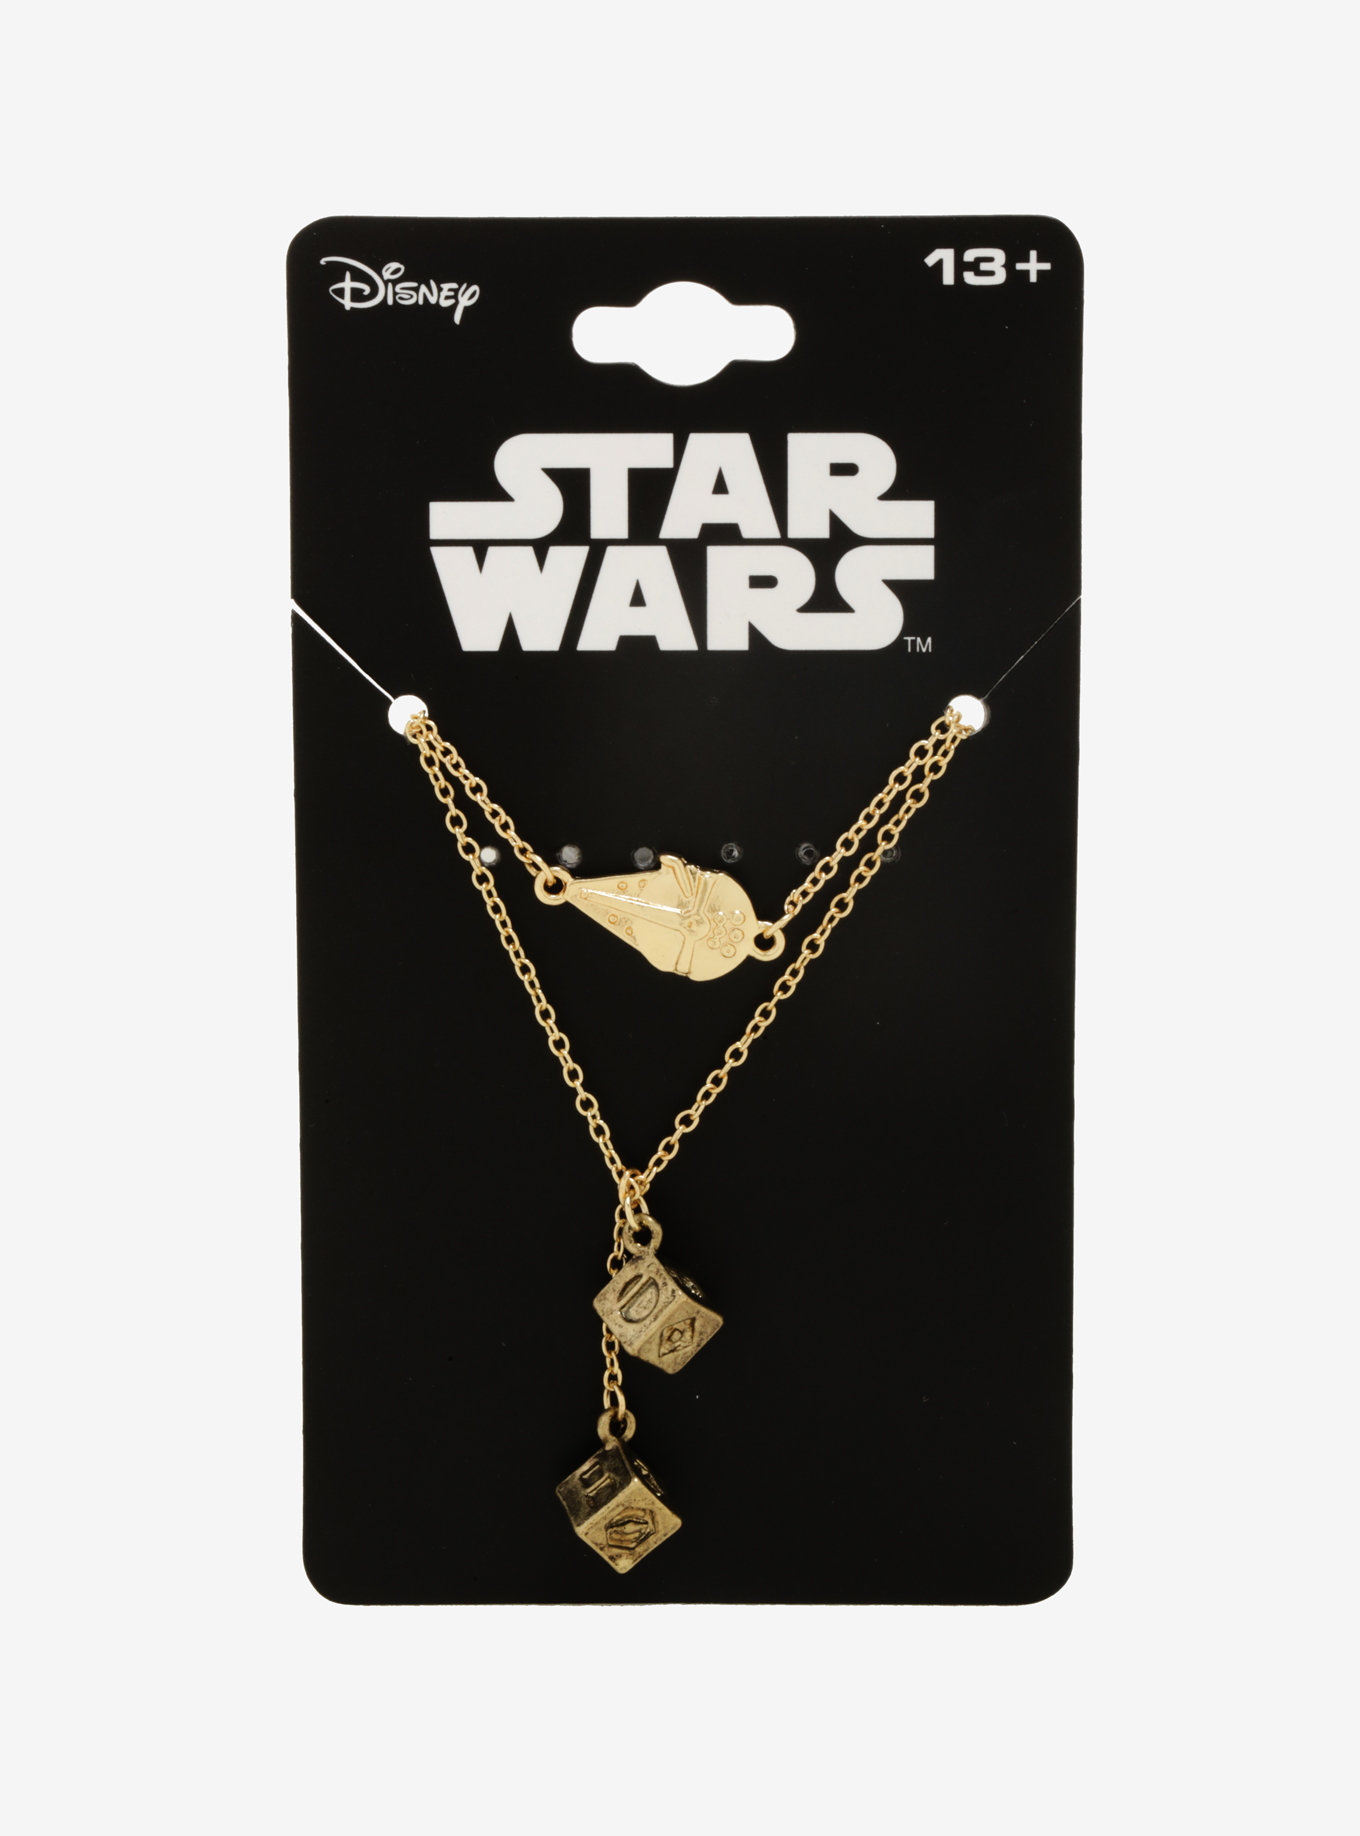 Solo A Star Wars Story Millennium Falcon Dice Layered Necklace at Hot Topic